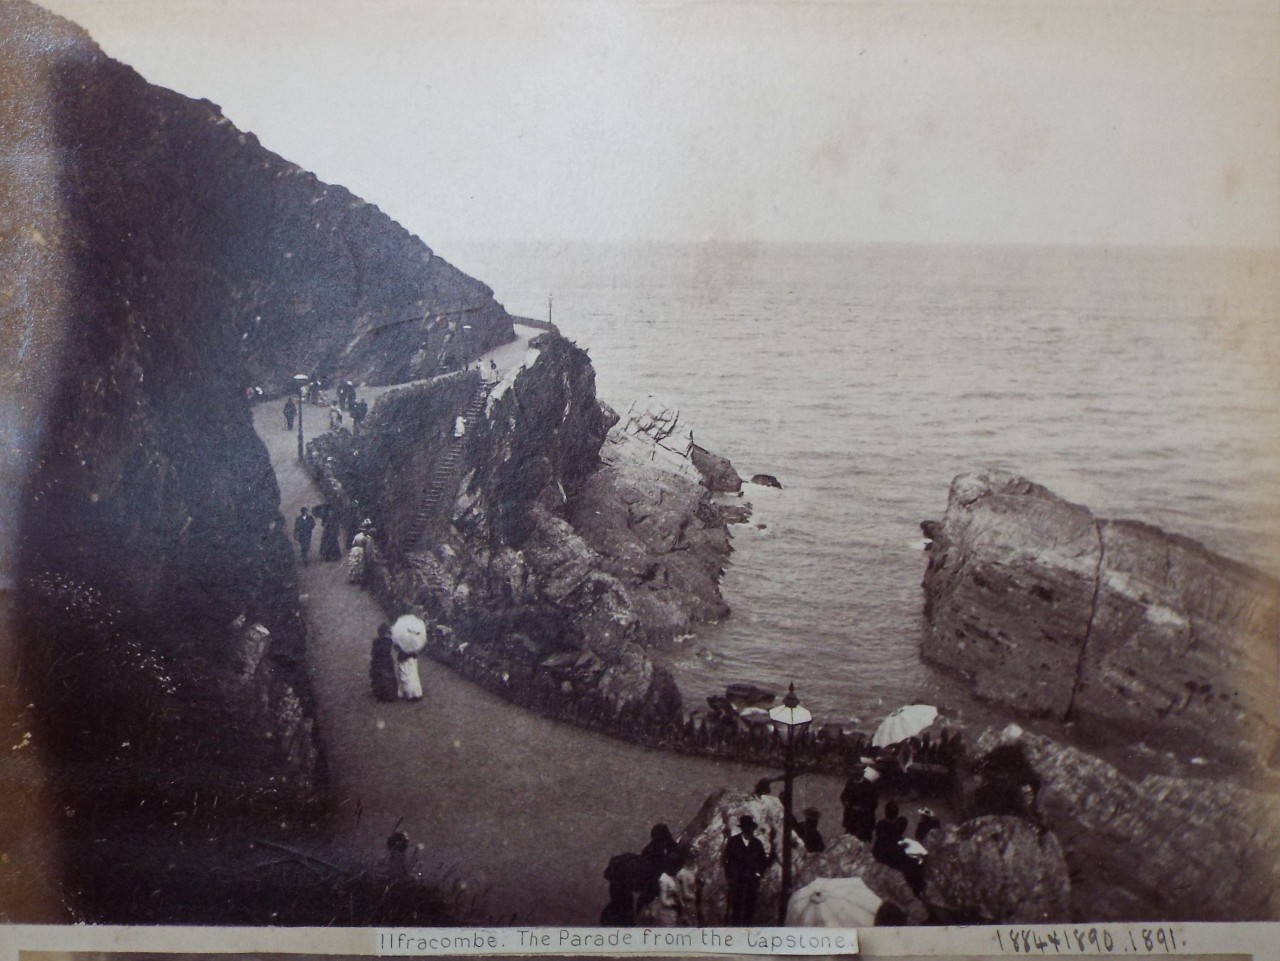 Photograph - Ilfracombe. The Parade from the Capstone.